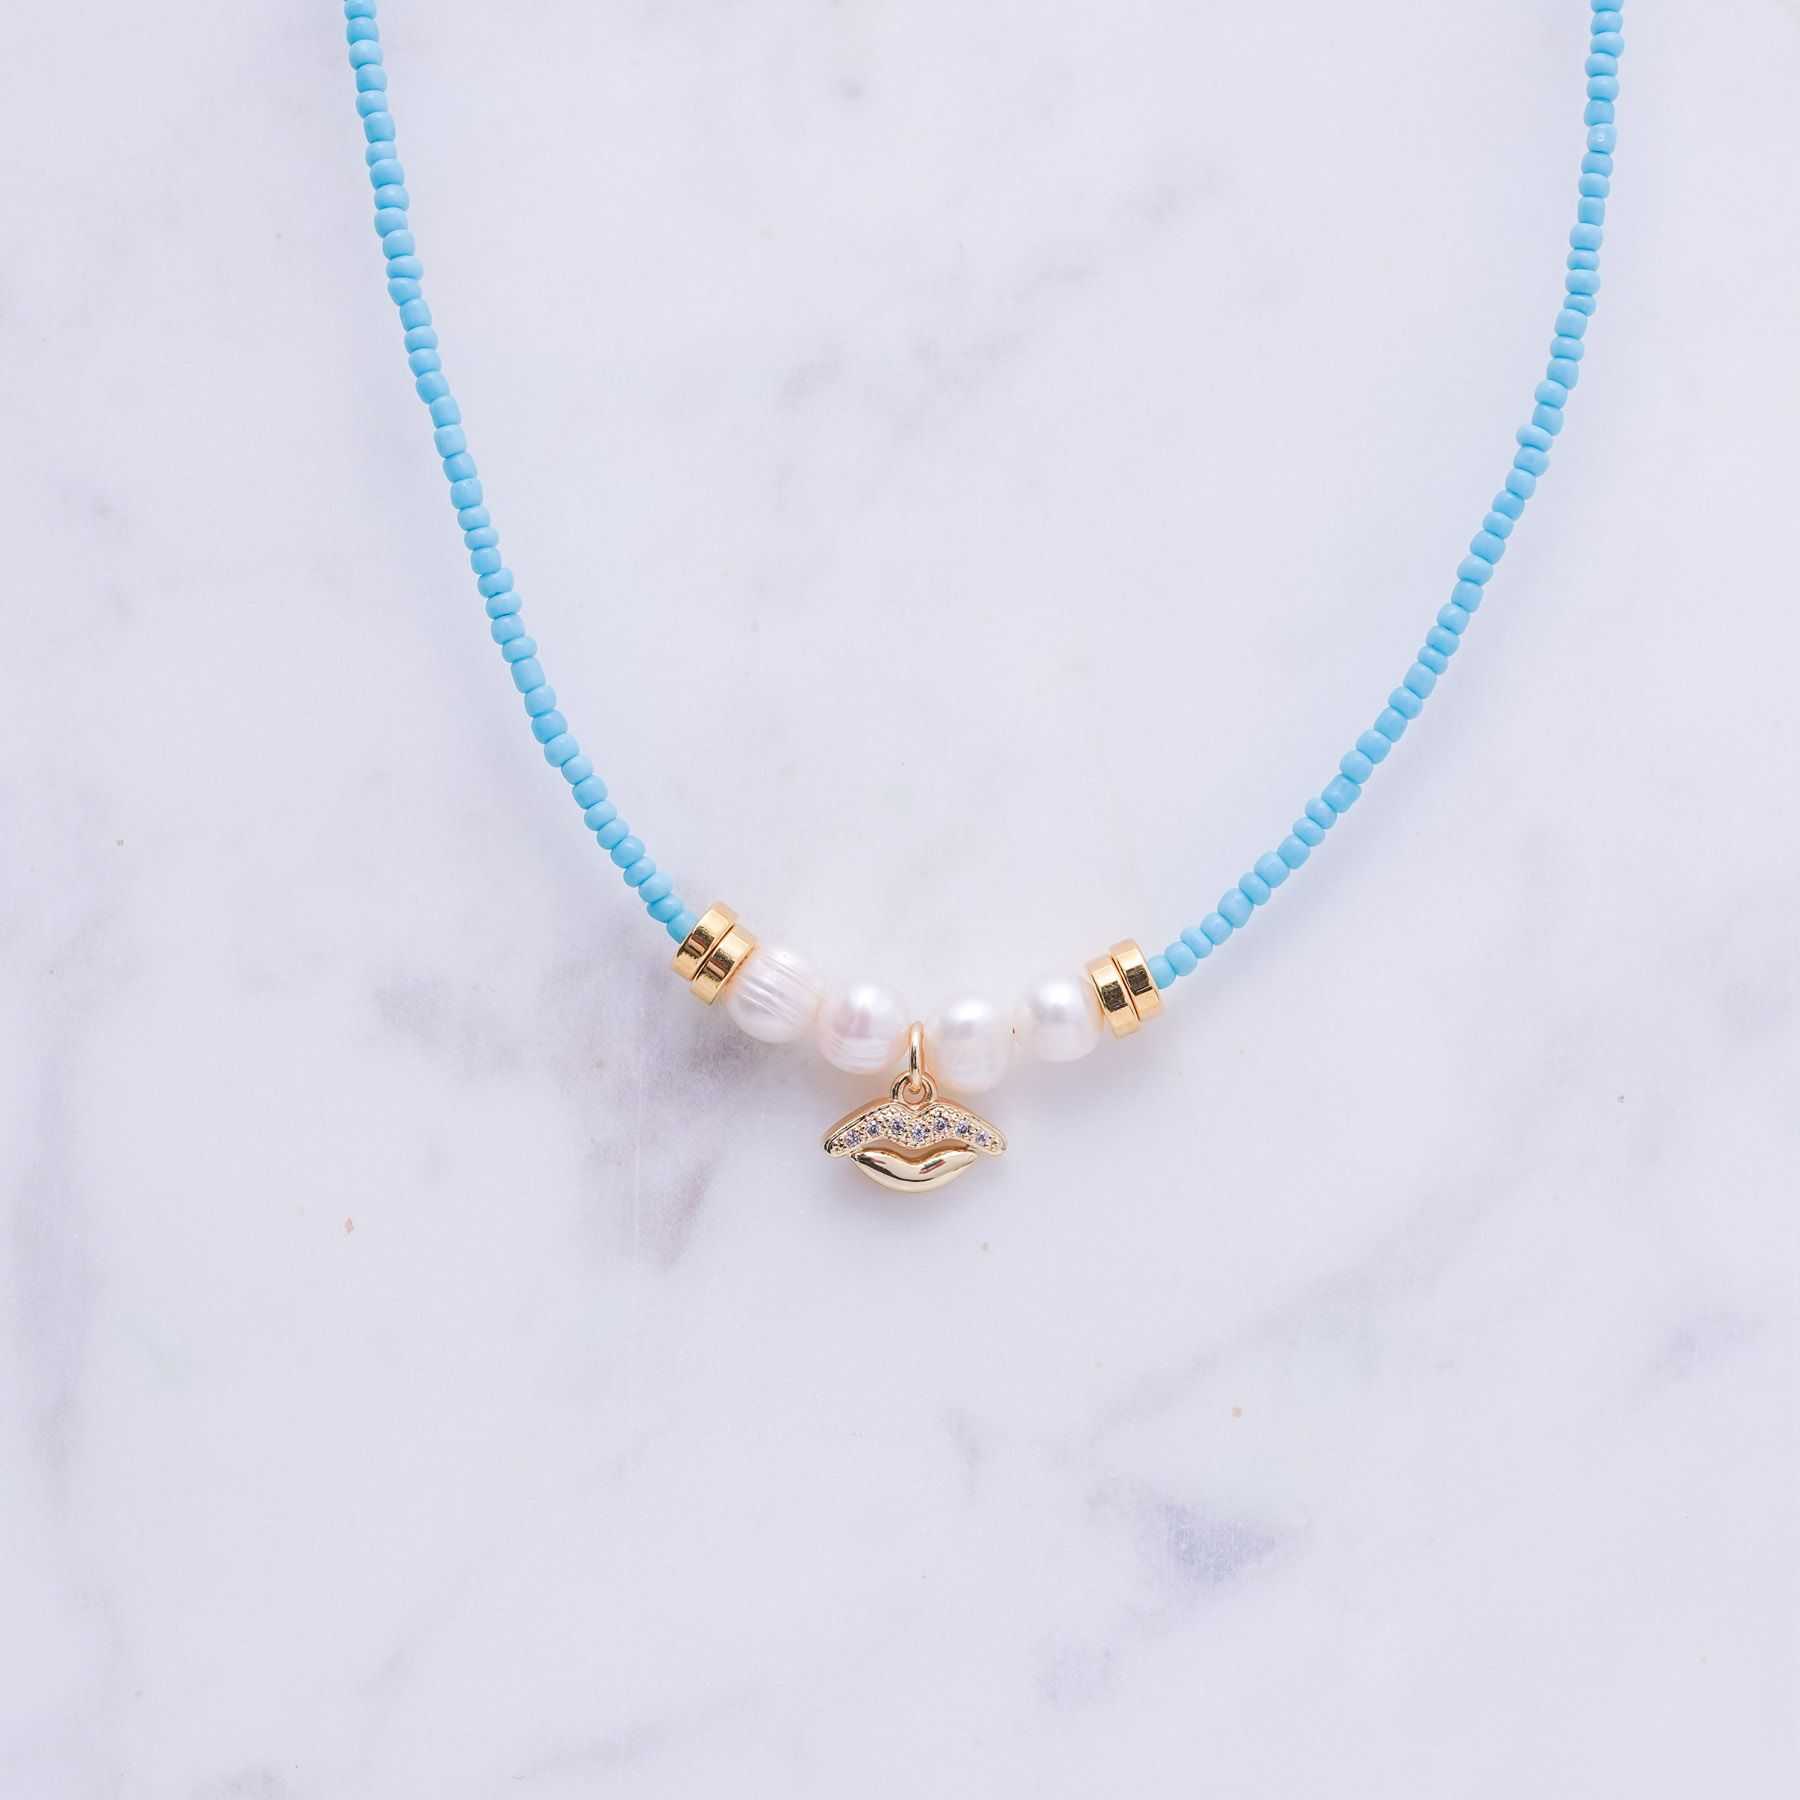 SALTY KISS NECKLACE - BLUE & GOLD